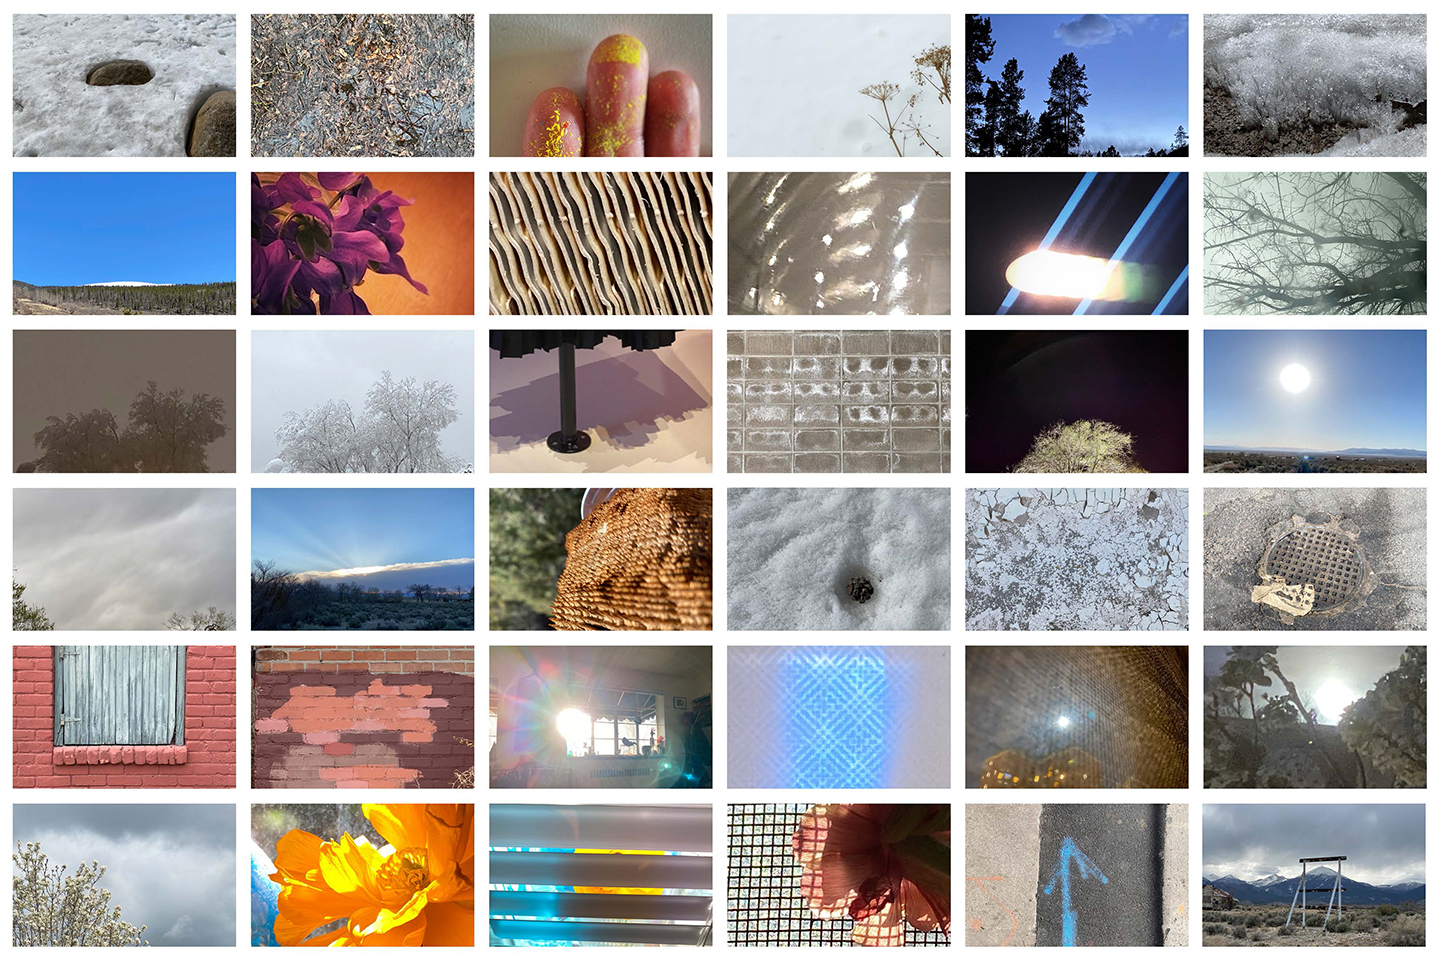 Collage of Daily Practice images from every day observations